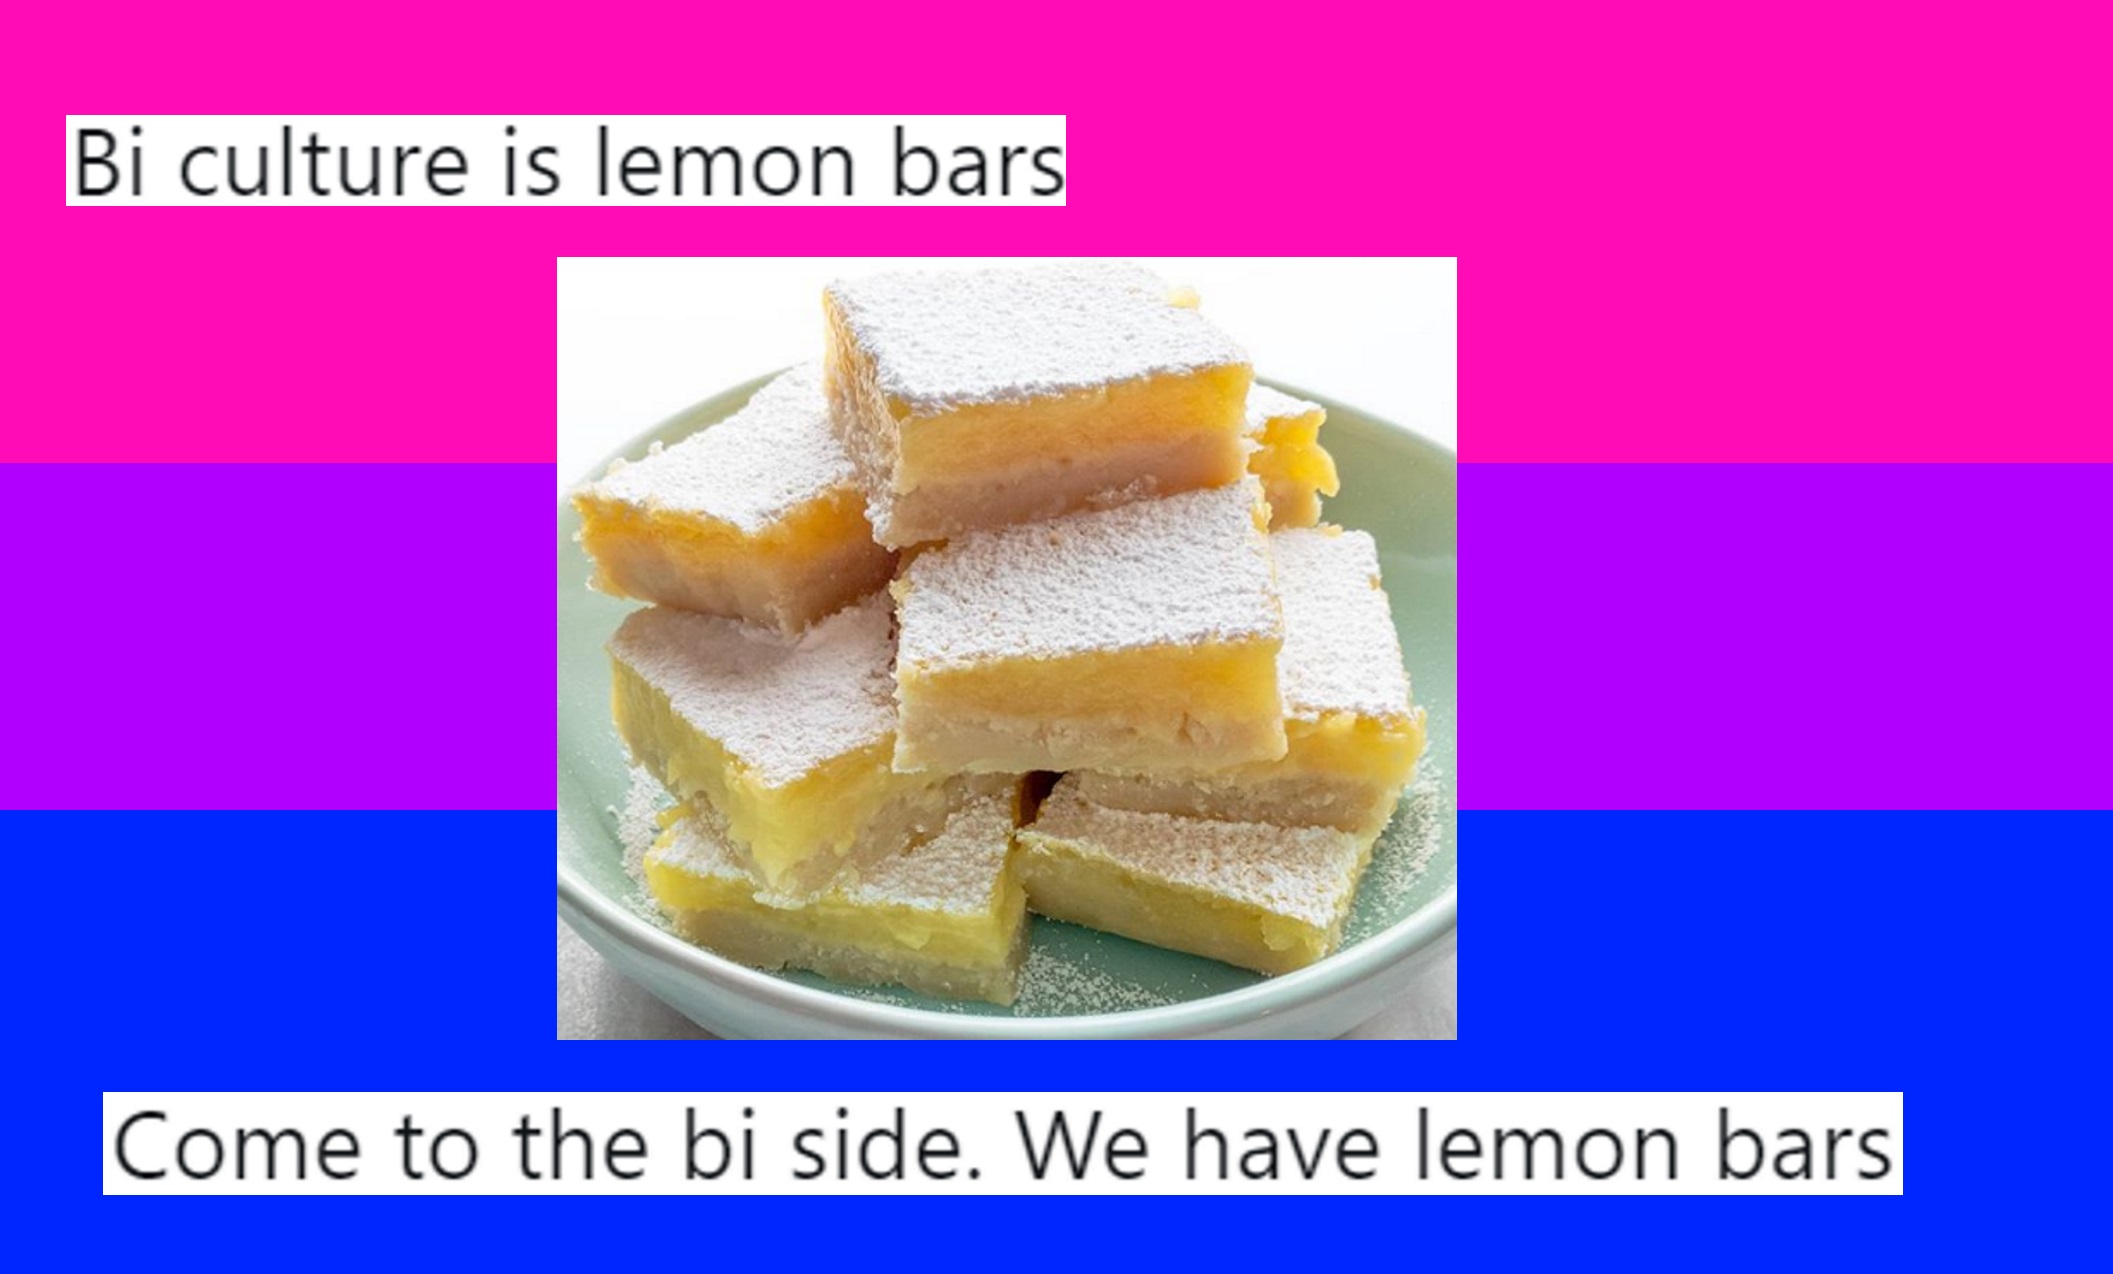 Lemon Bars Are The Official Snack Of Bisexual People Says Internet